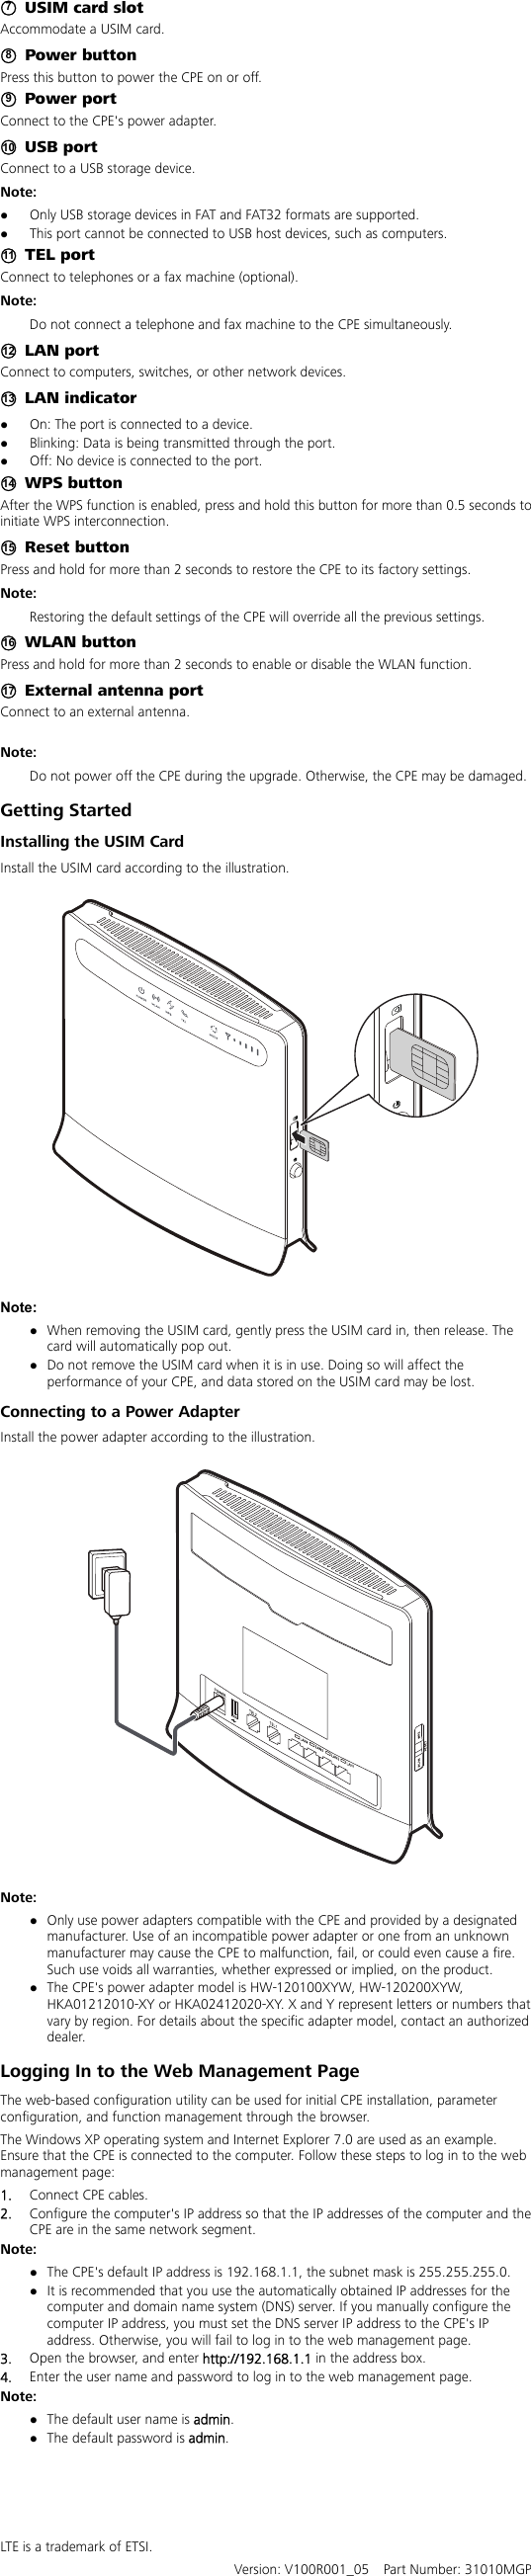  ○7  USIM card slot Accommodate a USIM card. ○8 Power button Press this button to power the CPE on or off.   ○9 Power port Connect to the CPE&apos;s power adapter. ○10  USB port Connect to a USB storage device. Note:  Only USB storage devices in FAT and FAT32 formats are supported.  This port cannot be connected to USB host devices, such as computers. ○11  TEL port Connect to telephones or a fax machine (optional). Note:  Do not connect a telephone and fax machine to the CPE simultaneously.   ○12  LAN port Connect to computers, switches, or other network devices. ○13  LAN indicator  On: The port is connected to a device.    Blinking: Data is being transmitted through the port.    Off: No device is connected to the port. ○14  WPS button After the WPS function is enabled, press and hold this button for more than 0.5 seconds to initiate WPS interconnection. ○15  Reset button Press and hold for more than 2 seconds to restore the CPE to its factory settings. Note:   Restoring the default settings of the CPE will override all the previous settings. ○16  WLAN button Press and hold for more than 2 seconds to enable or disable the WLAN function.   ○17   External antenna port Connect to an external antenna.  Note:  Do not power off the CPE during the upgrade. Otherwise, the CPE may be damaged. Getting Started Installing the USIM Card Install the USIM card according to the illustration.      Note:  When removing the USIM card, gently press the USIM card in, then release. The card will automatically pop out.  Do not remove the USIM card when it is in use. Doing so will affect the performance of your CPE, and data stored on the USIM card may be lost. Connecting to a Power Adapter Install the power adapter according to the illustration.    Note:  Only use power adapters compatible with the CPE and provided by a designated manufacturer. Use of an incompatible power adapter or one from an unknown manufacturer may cause the CPE to malfunction, fail, or could even cause a fire. Such use voids all warranties, whether expressed or implied, on the product.  The CPE&apos;s power adapter model is HW-120100XYW, HW-120200XYW, HKA01212010-XY or HKA02412020-XY. X and Y represent letters or numbers that vary by region. For details about the specific adapter model, contact an authorized dealer. Logging In to the Web Management Page The web-based configuration utility can be used for initial CPE installation, parameter configuration, and function management through the browser.   The Windows XP operating system and Internet Explorer 7.0 are used as an example. Ensure that the CPE is connected to the computer. Follow these steps to log in to the web management page: 1.  Connect CPE cables. 2.  Configure the computer&apos;s IP address so that the IP addresses of the computer and the CPE are in the same network segment. Note:   The CPE&apos;s default IP address is 192.168.1.1, the subnet mask is 255.255.255.0.  It is recommended that you use the automatically obtained IP addresses for the computer and domain name system (DNS) server. If you manually configure the computer IP address, you must set the DNS server IP address to the CPE&apos;s IP address. Otherwise, you will fail to log in to the web management page. 3.  Open the browser, and enter http://192.168.1.1 in the address box. 4.  Enter the user name and password to log in to the web management page. Note:   The default user name is admin.   The default password is admin.     LTE is a trademark of ETSI.   Version: V100R001_05    Part Number: 31010MGP 